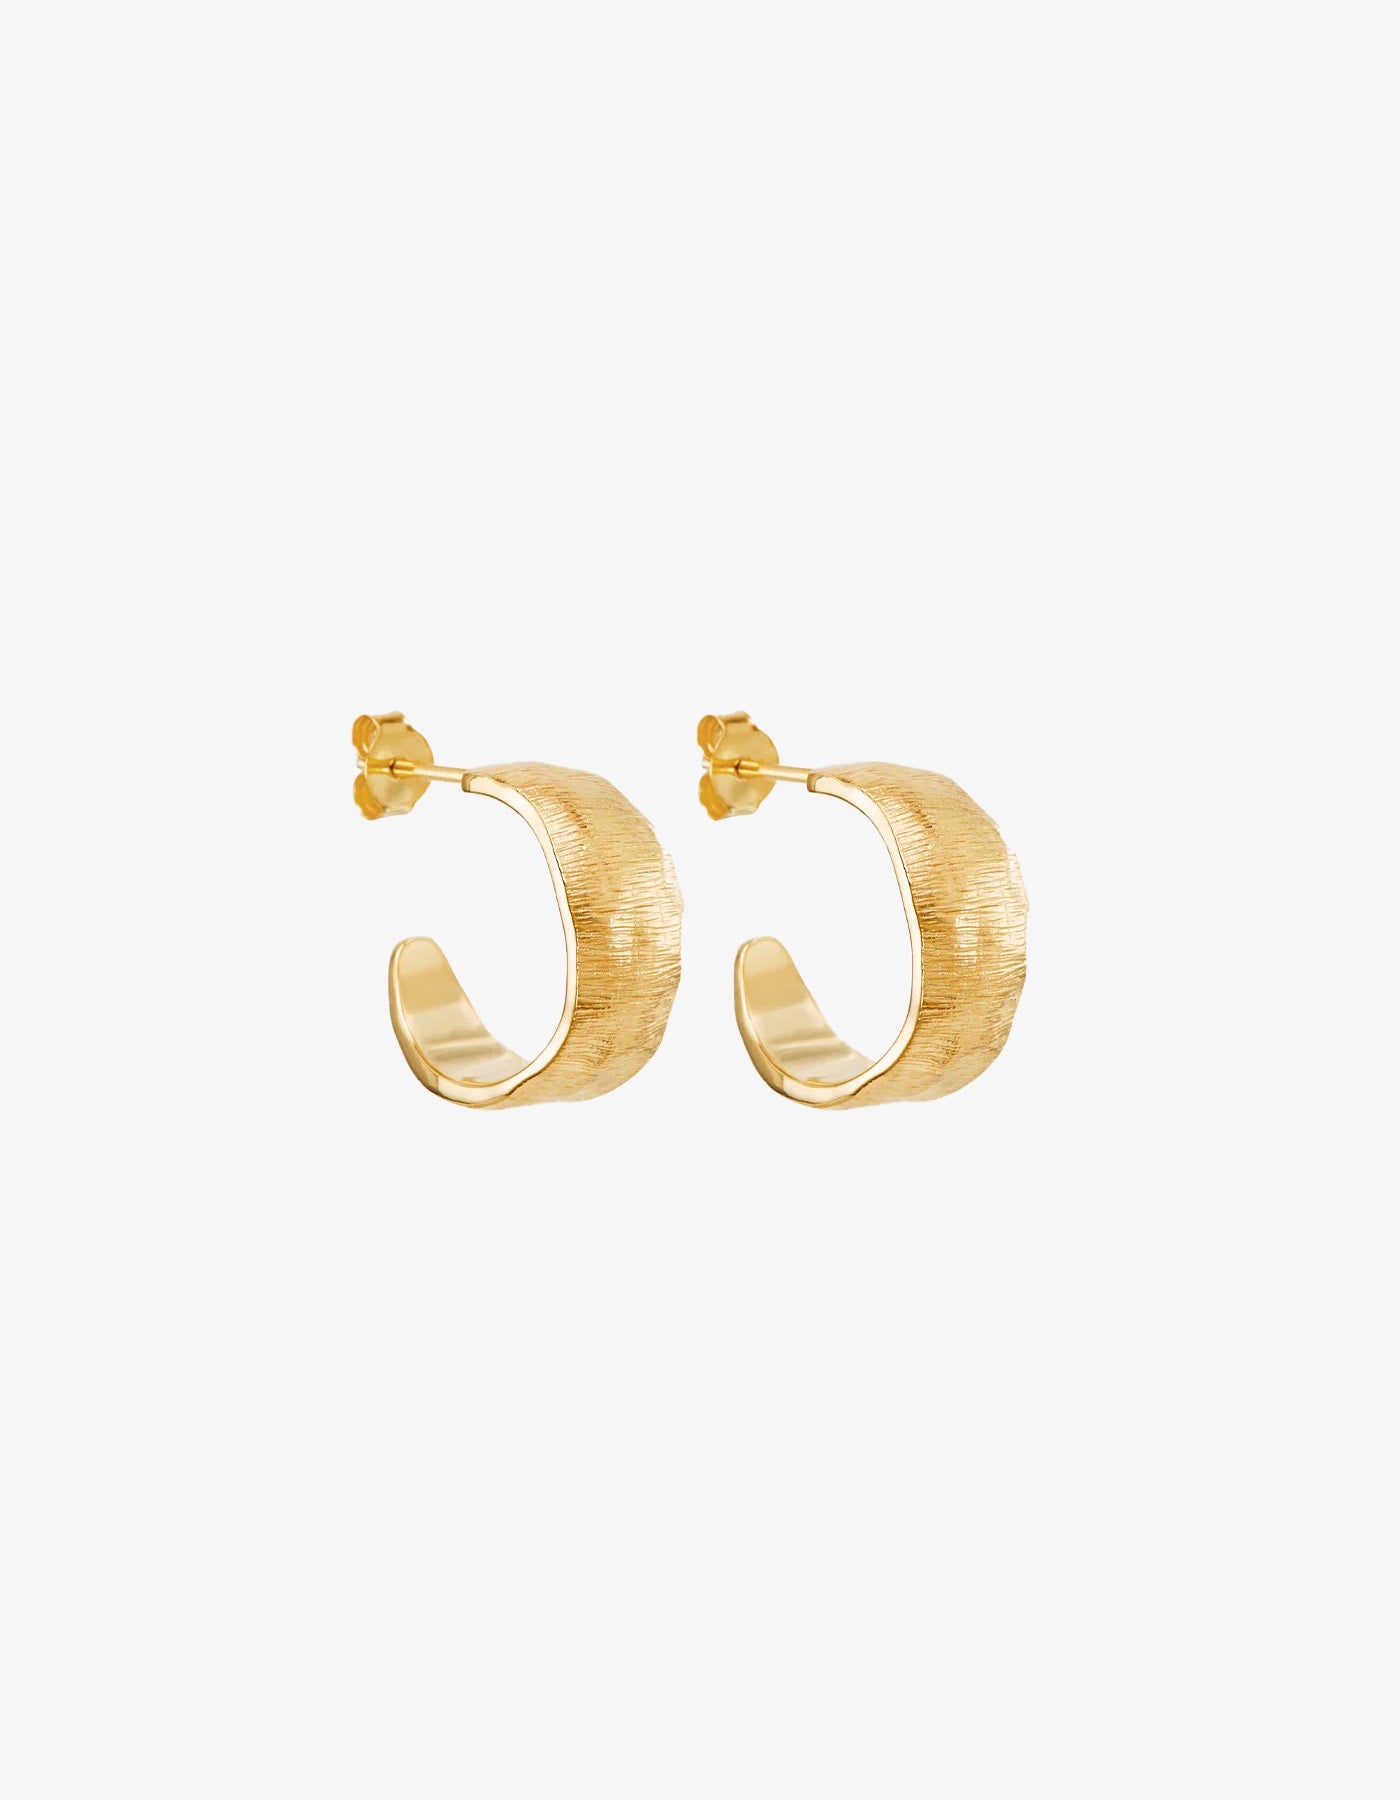 By Charlotte Woven Light Hoops Gold